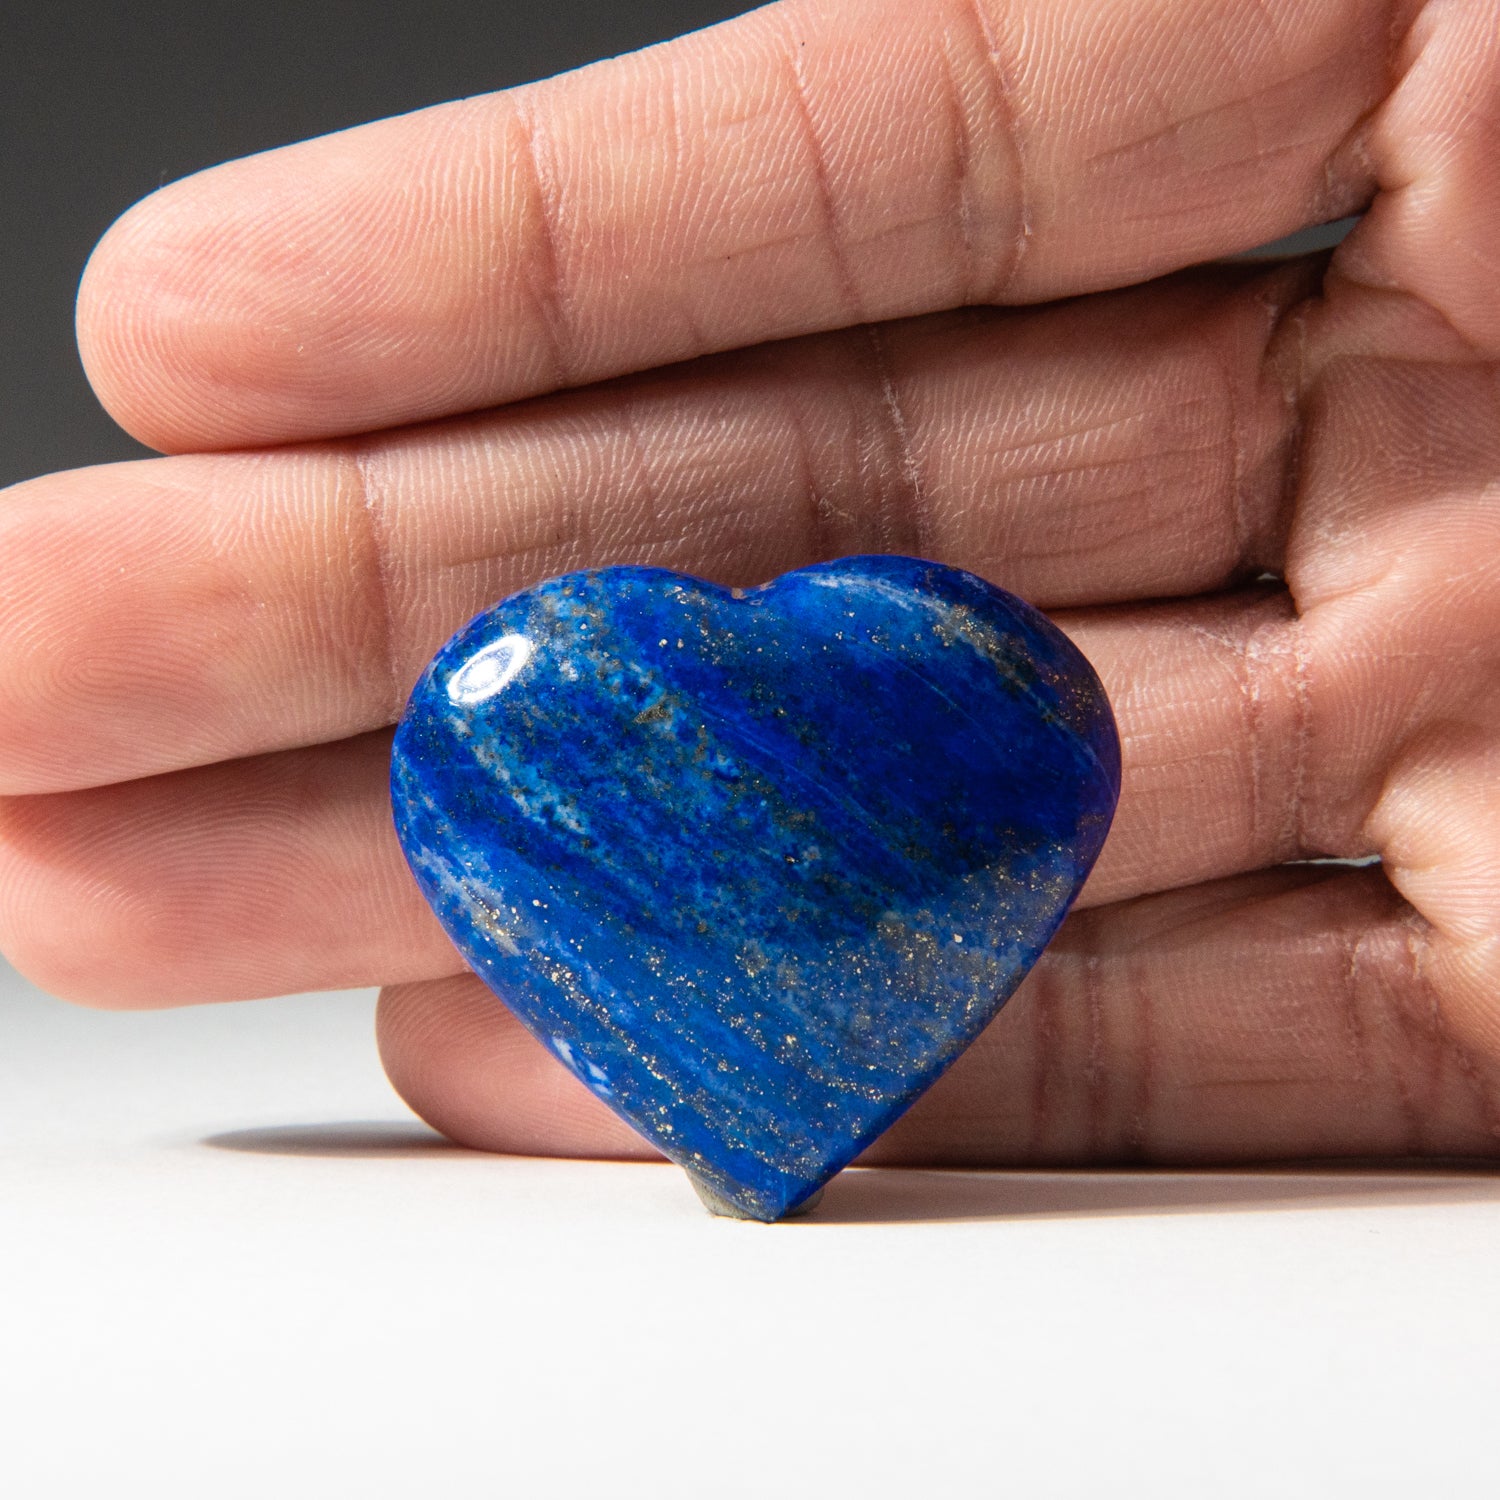 Polished Lapis Lazuli Heart from Afghanistan (30 grams)